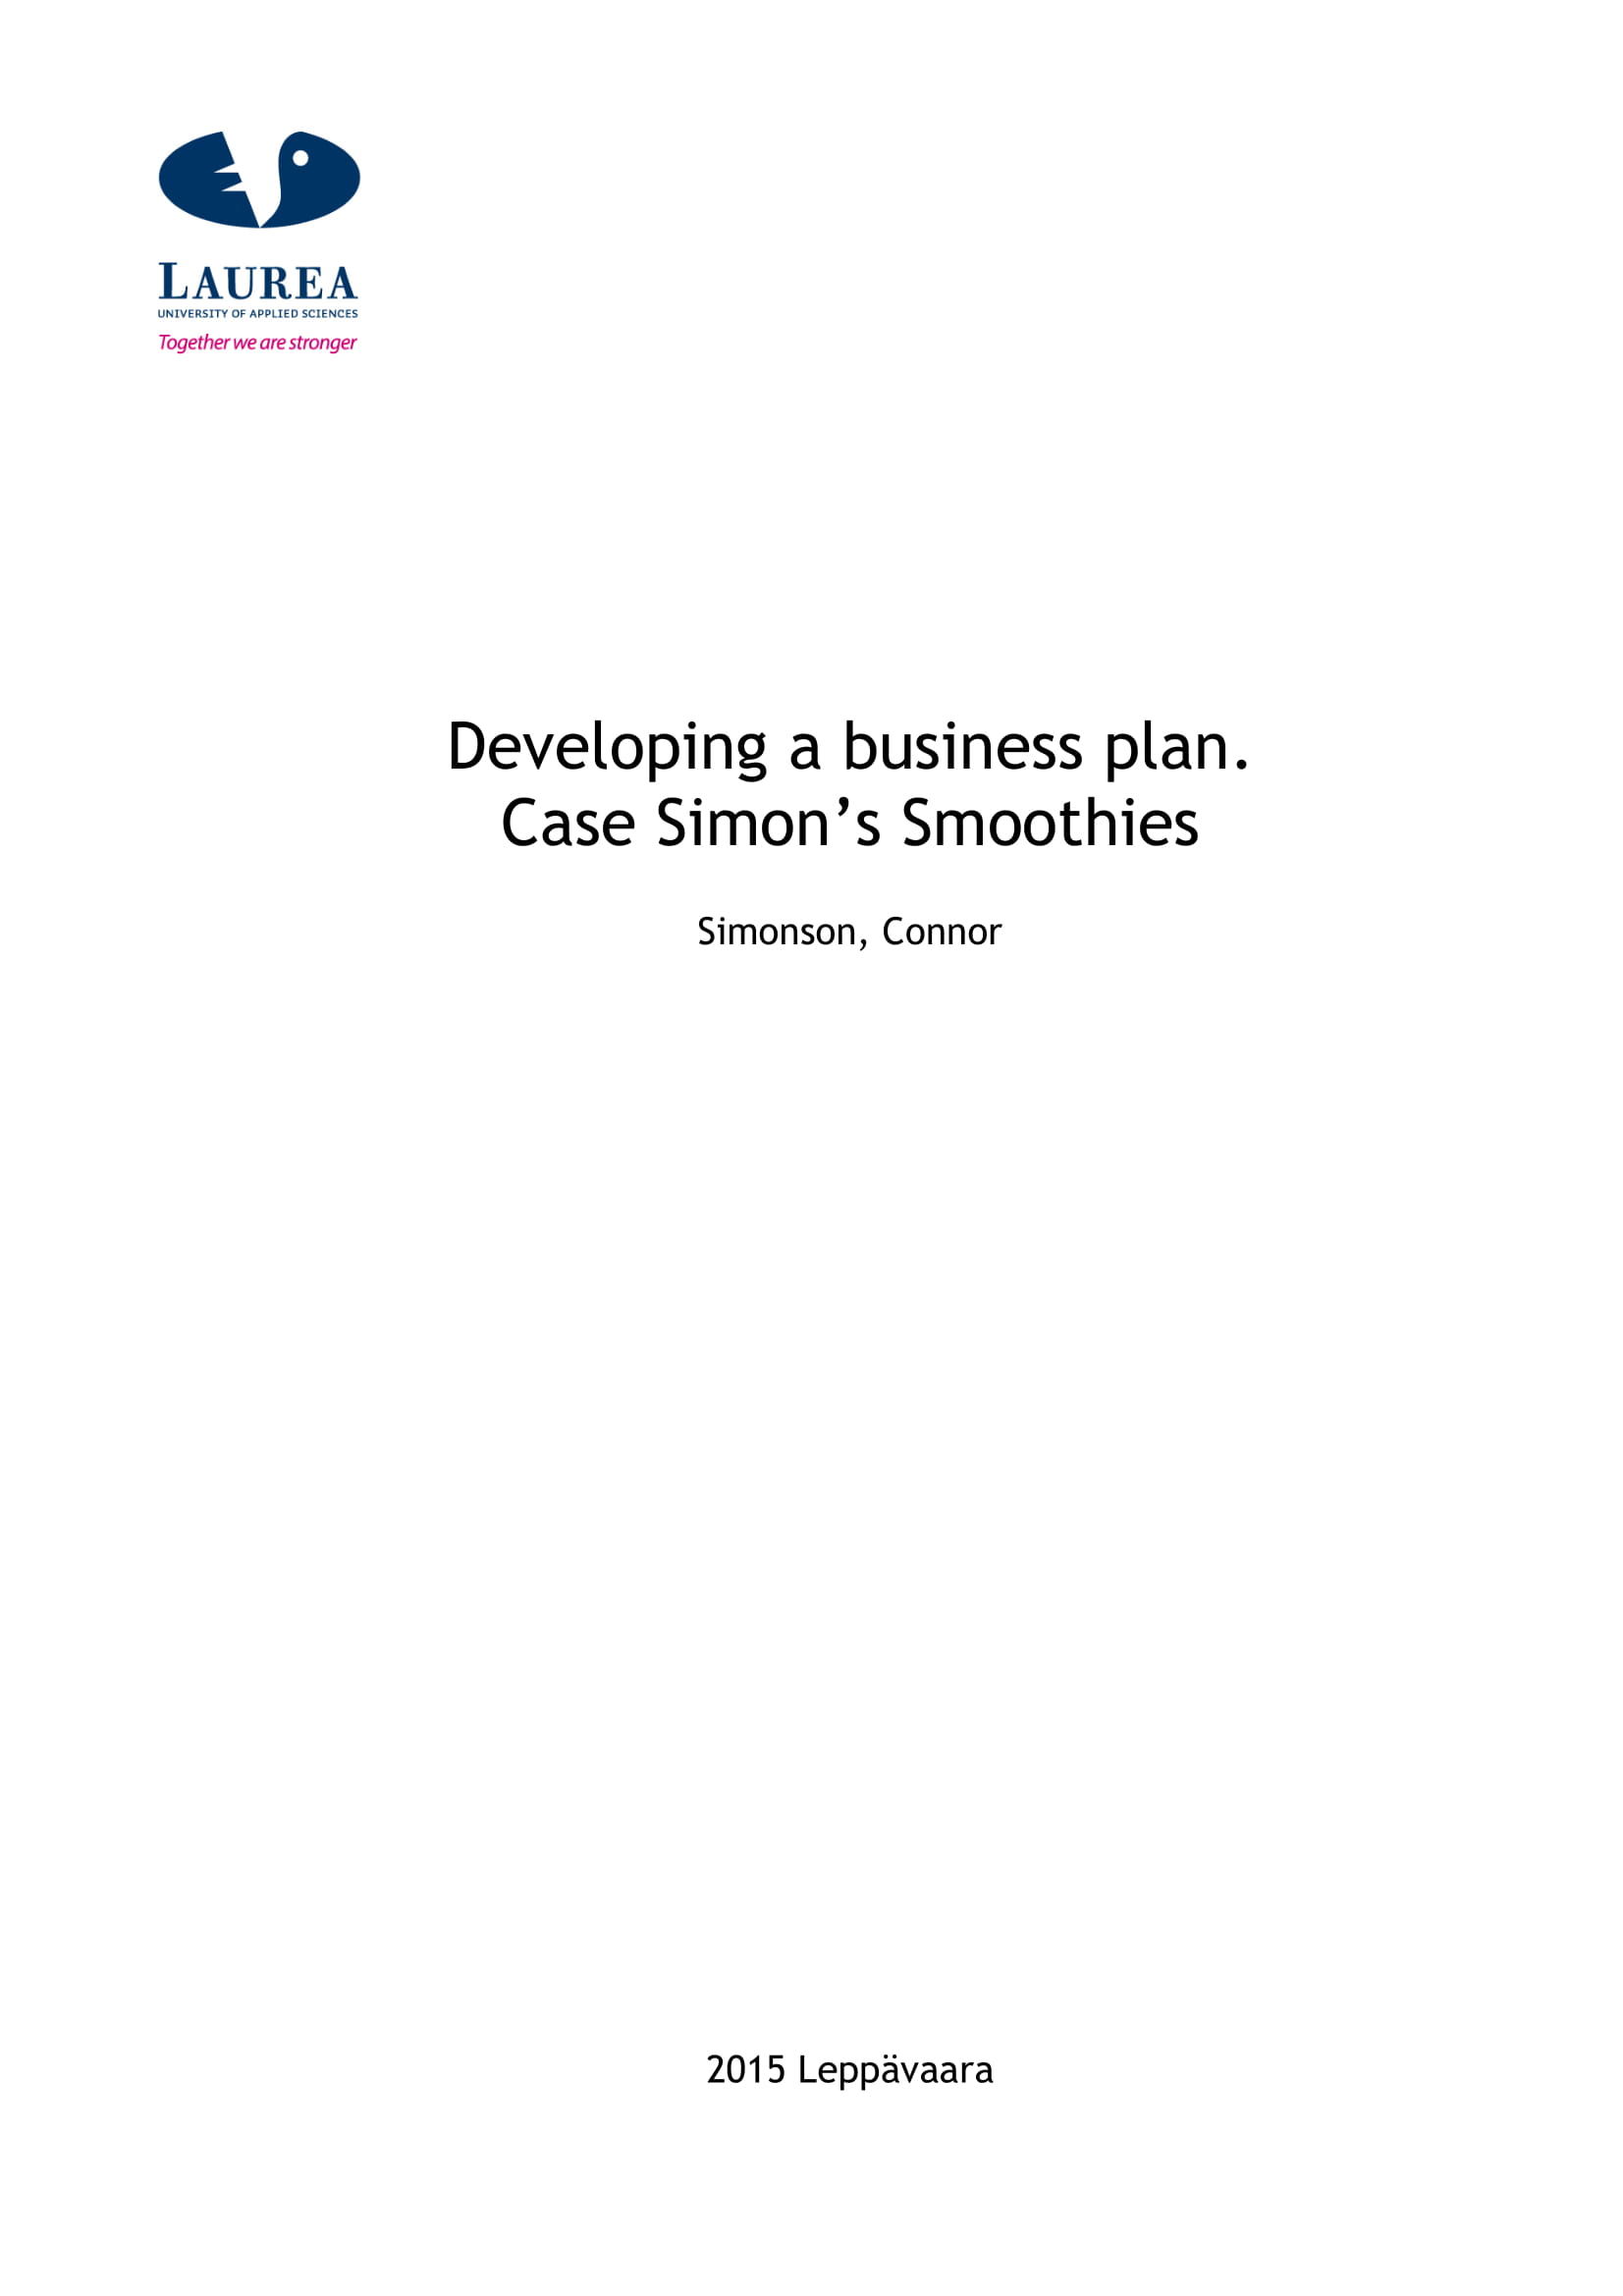 example of a business case proposal